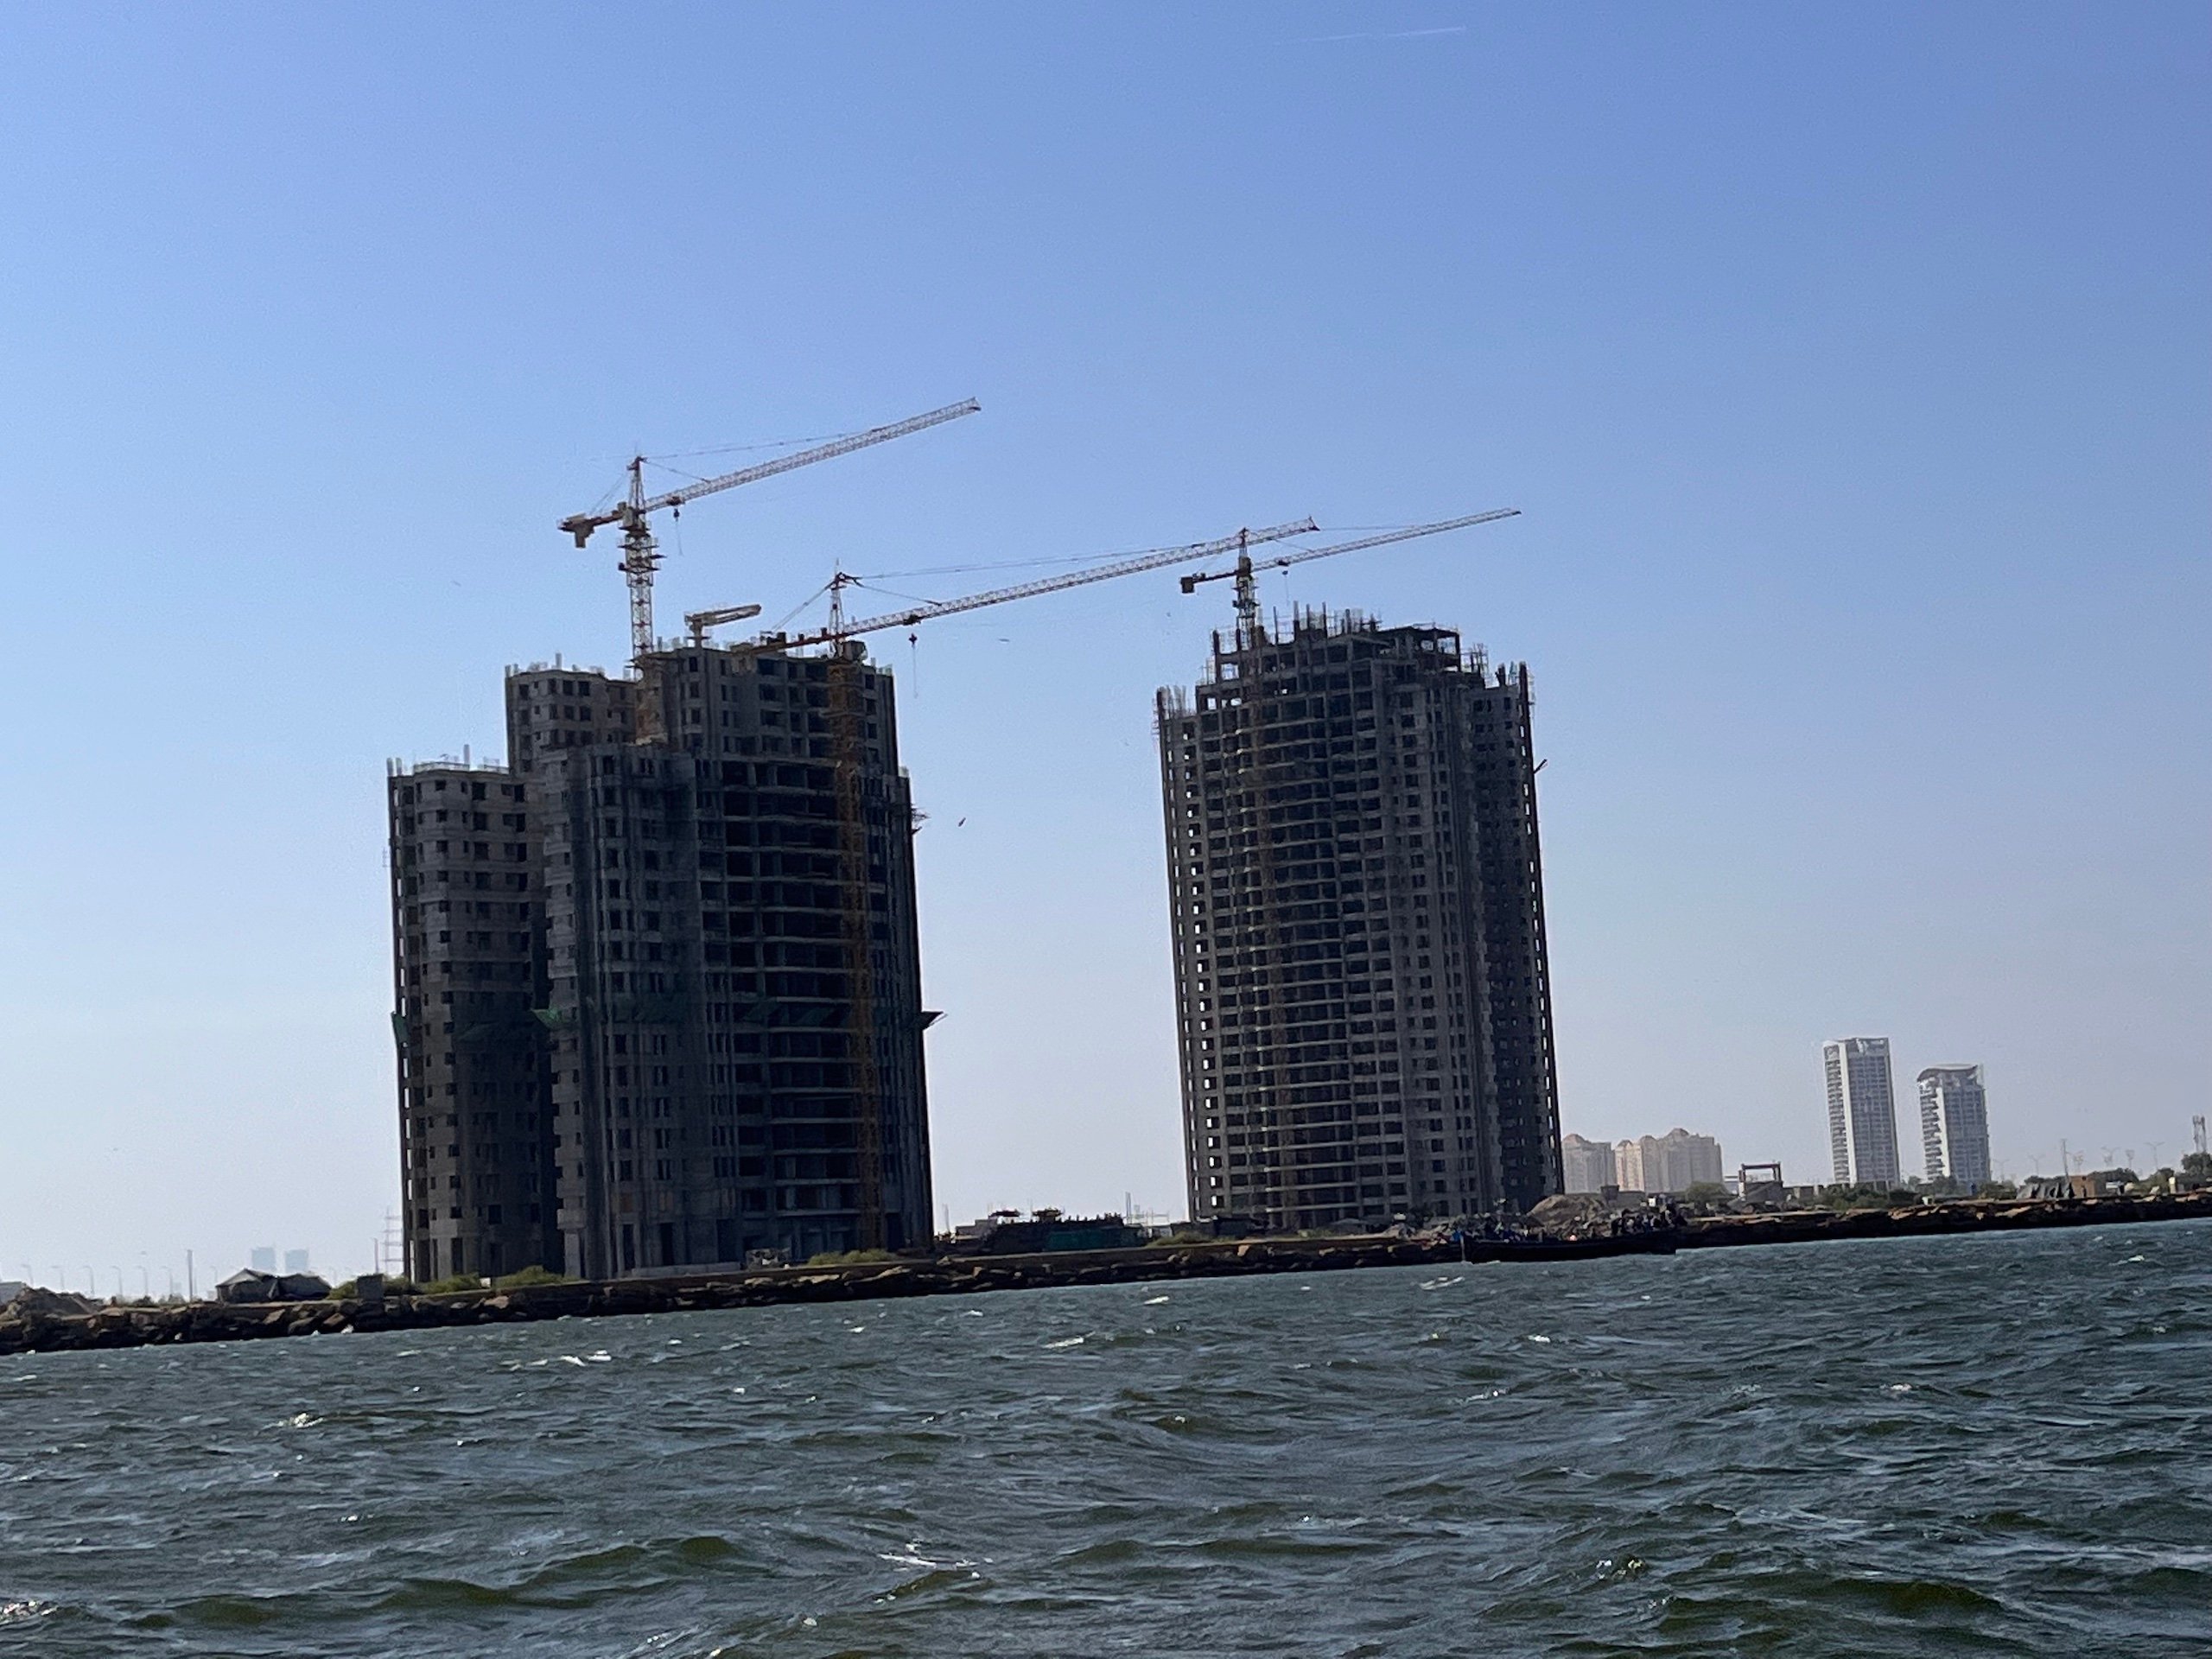 High-rise buildings being built on reclaimed land in DHA's phase 8 development in Karachi in April 2022. The buildings will look out on the Arabian Sea when complete.